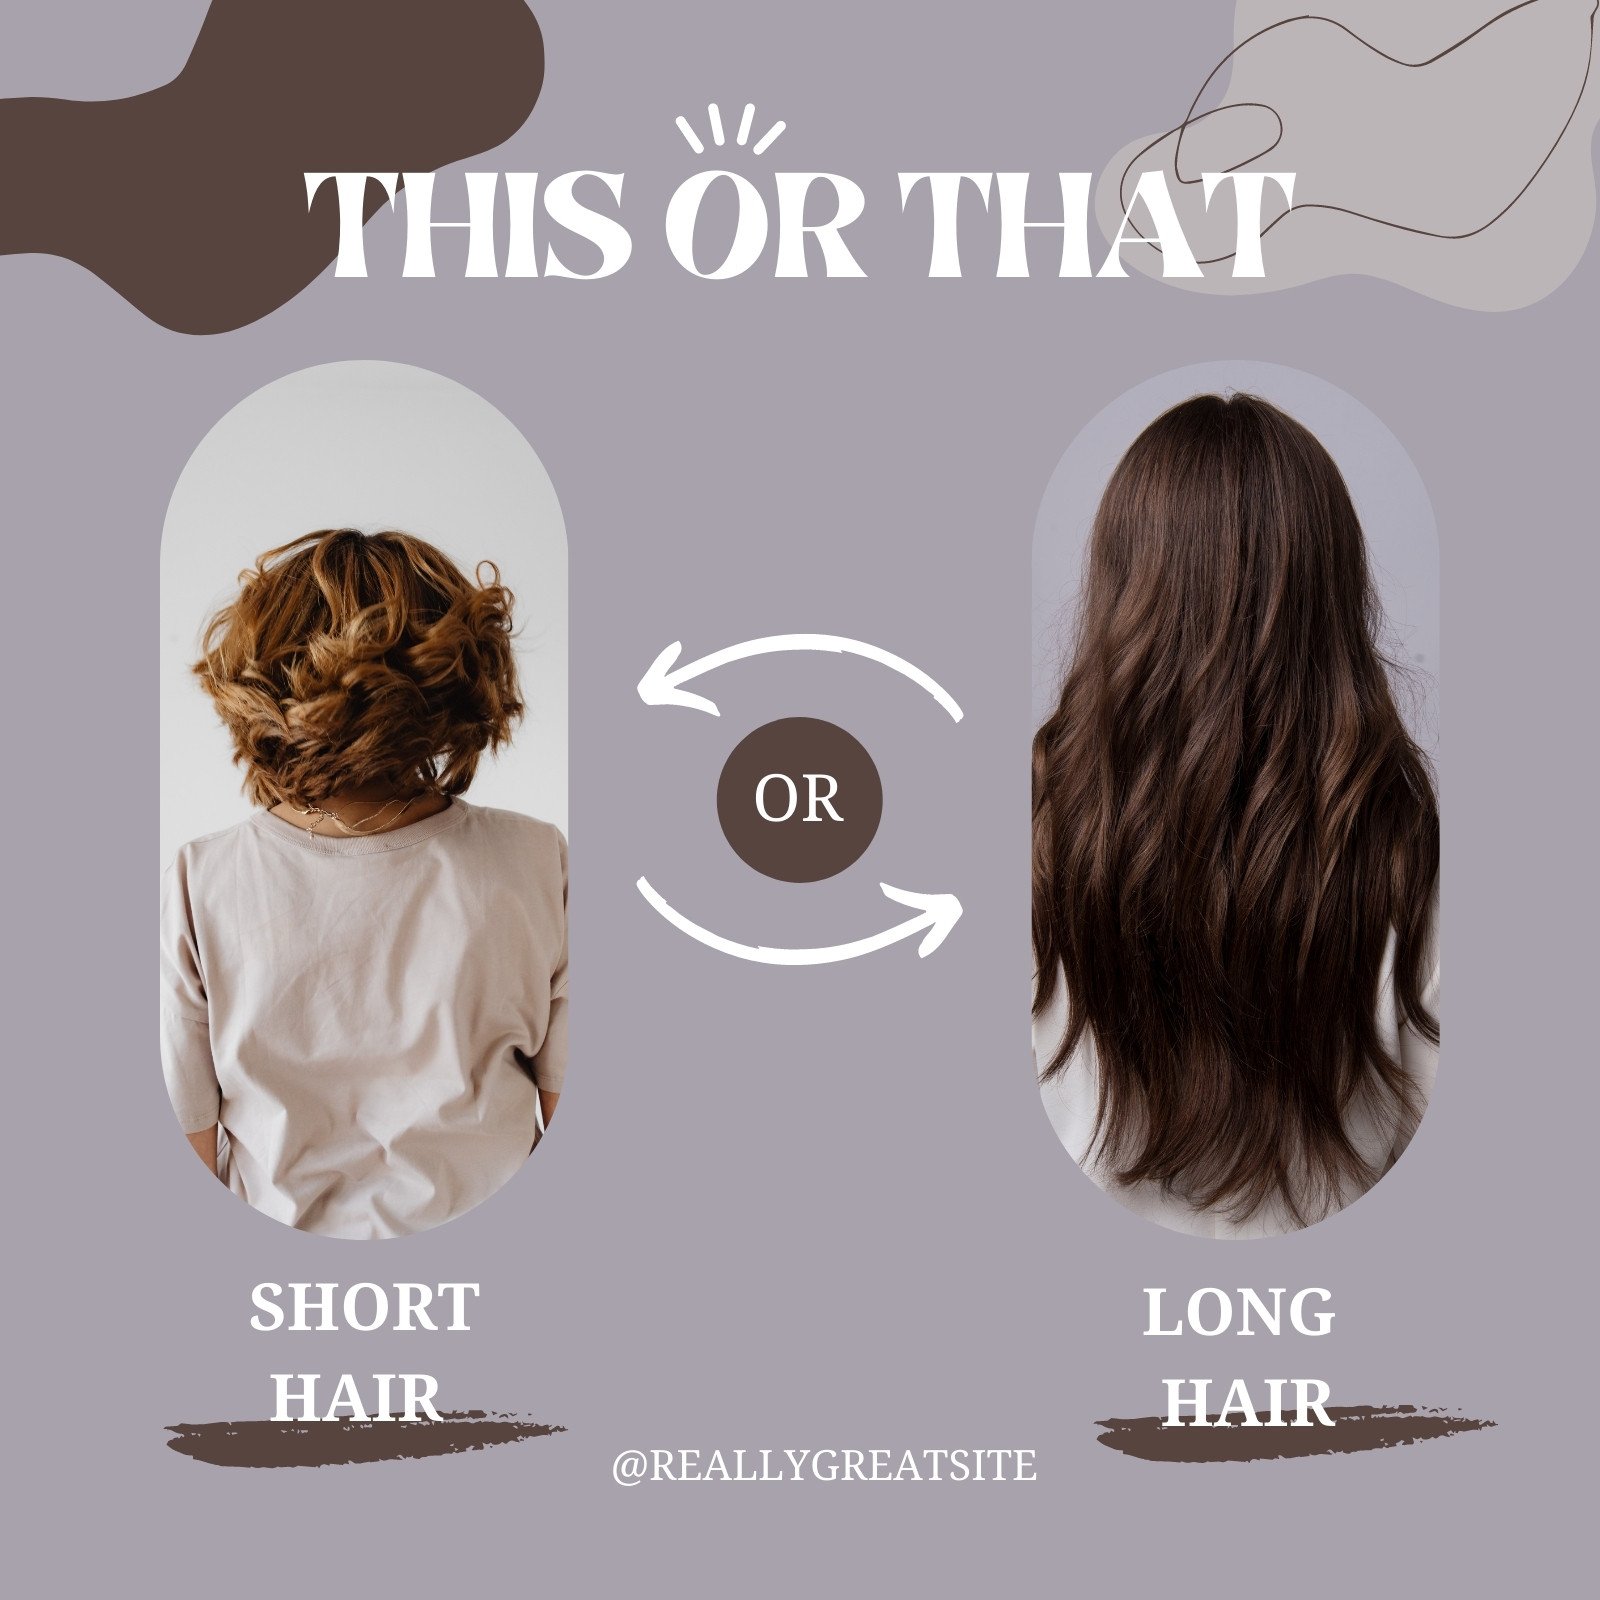 Free and customizable hair templates